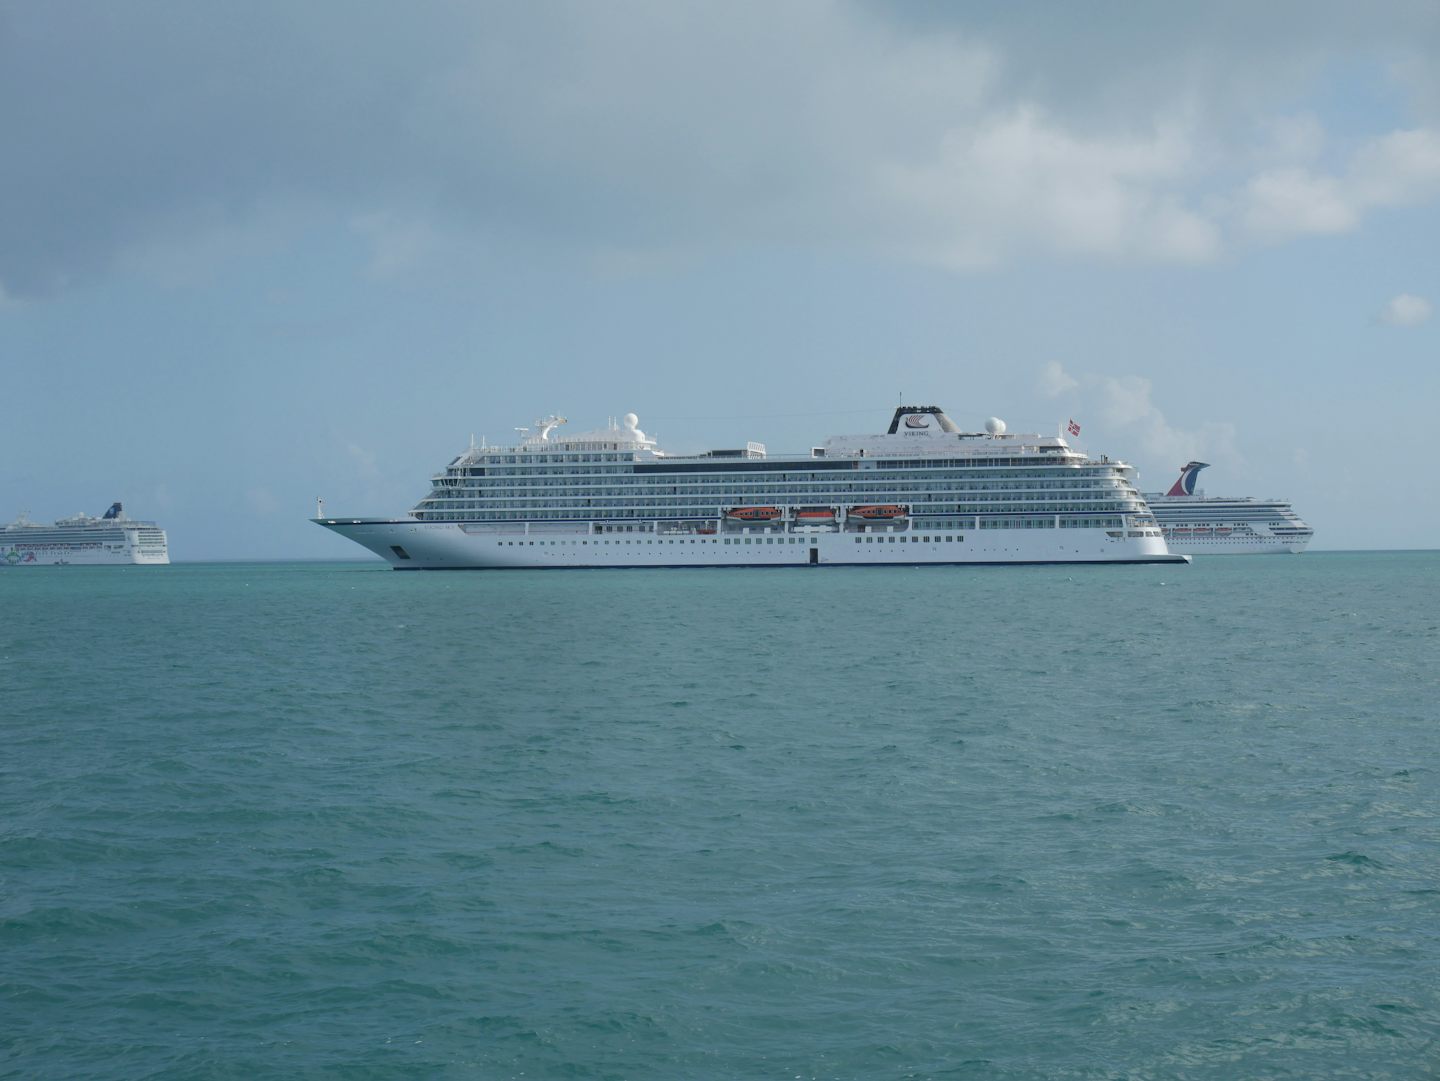 Viking Sky from tender returning to ship from excursion